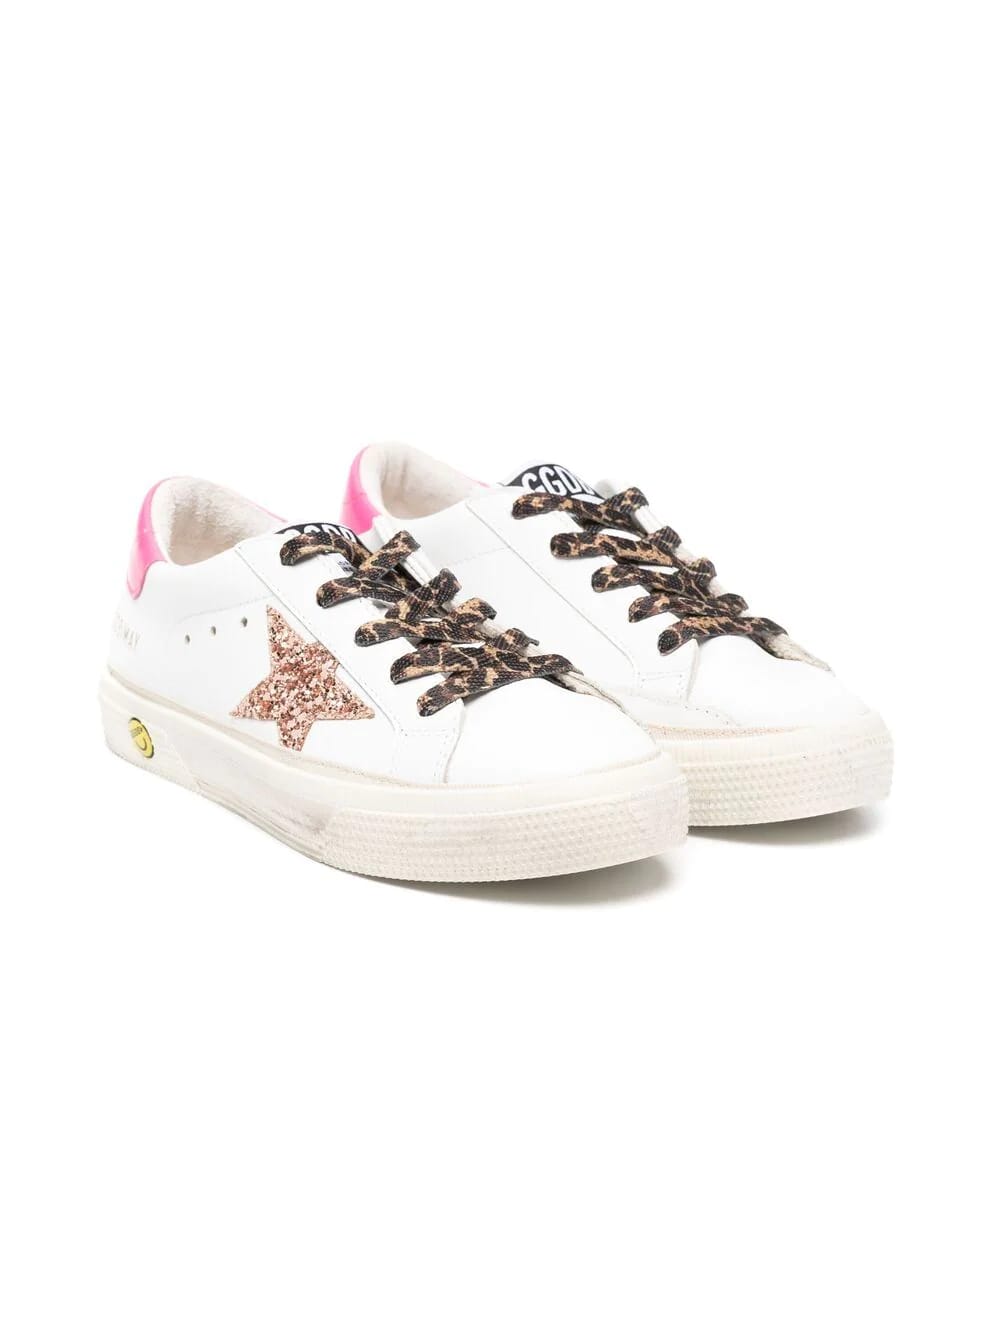 Golden Goose Kid White Super-star Sneakers With Fuchsia Spoiler, Leopard Laces And Pink Glitter Star